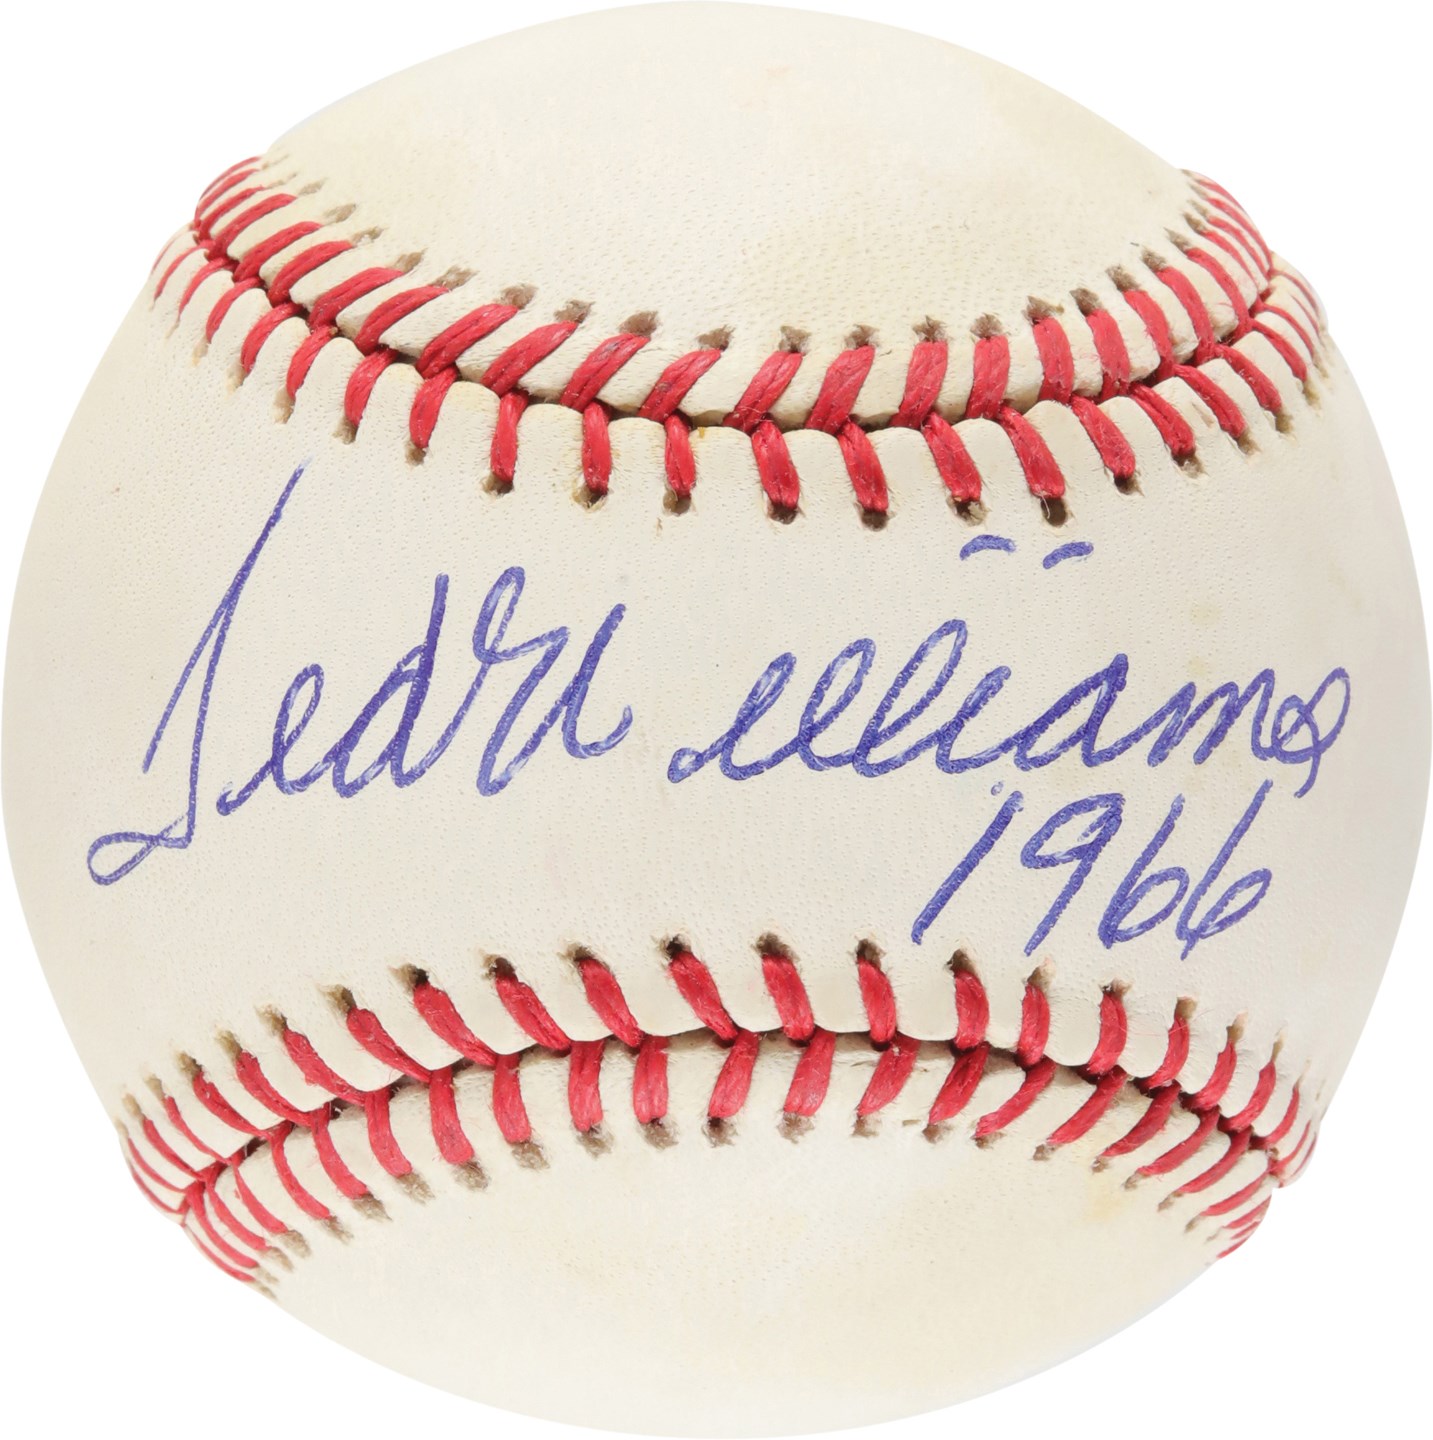 - Ted Williams "1966" Hall of Fame Induction Year Signed Baseball (PSA & JSA)